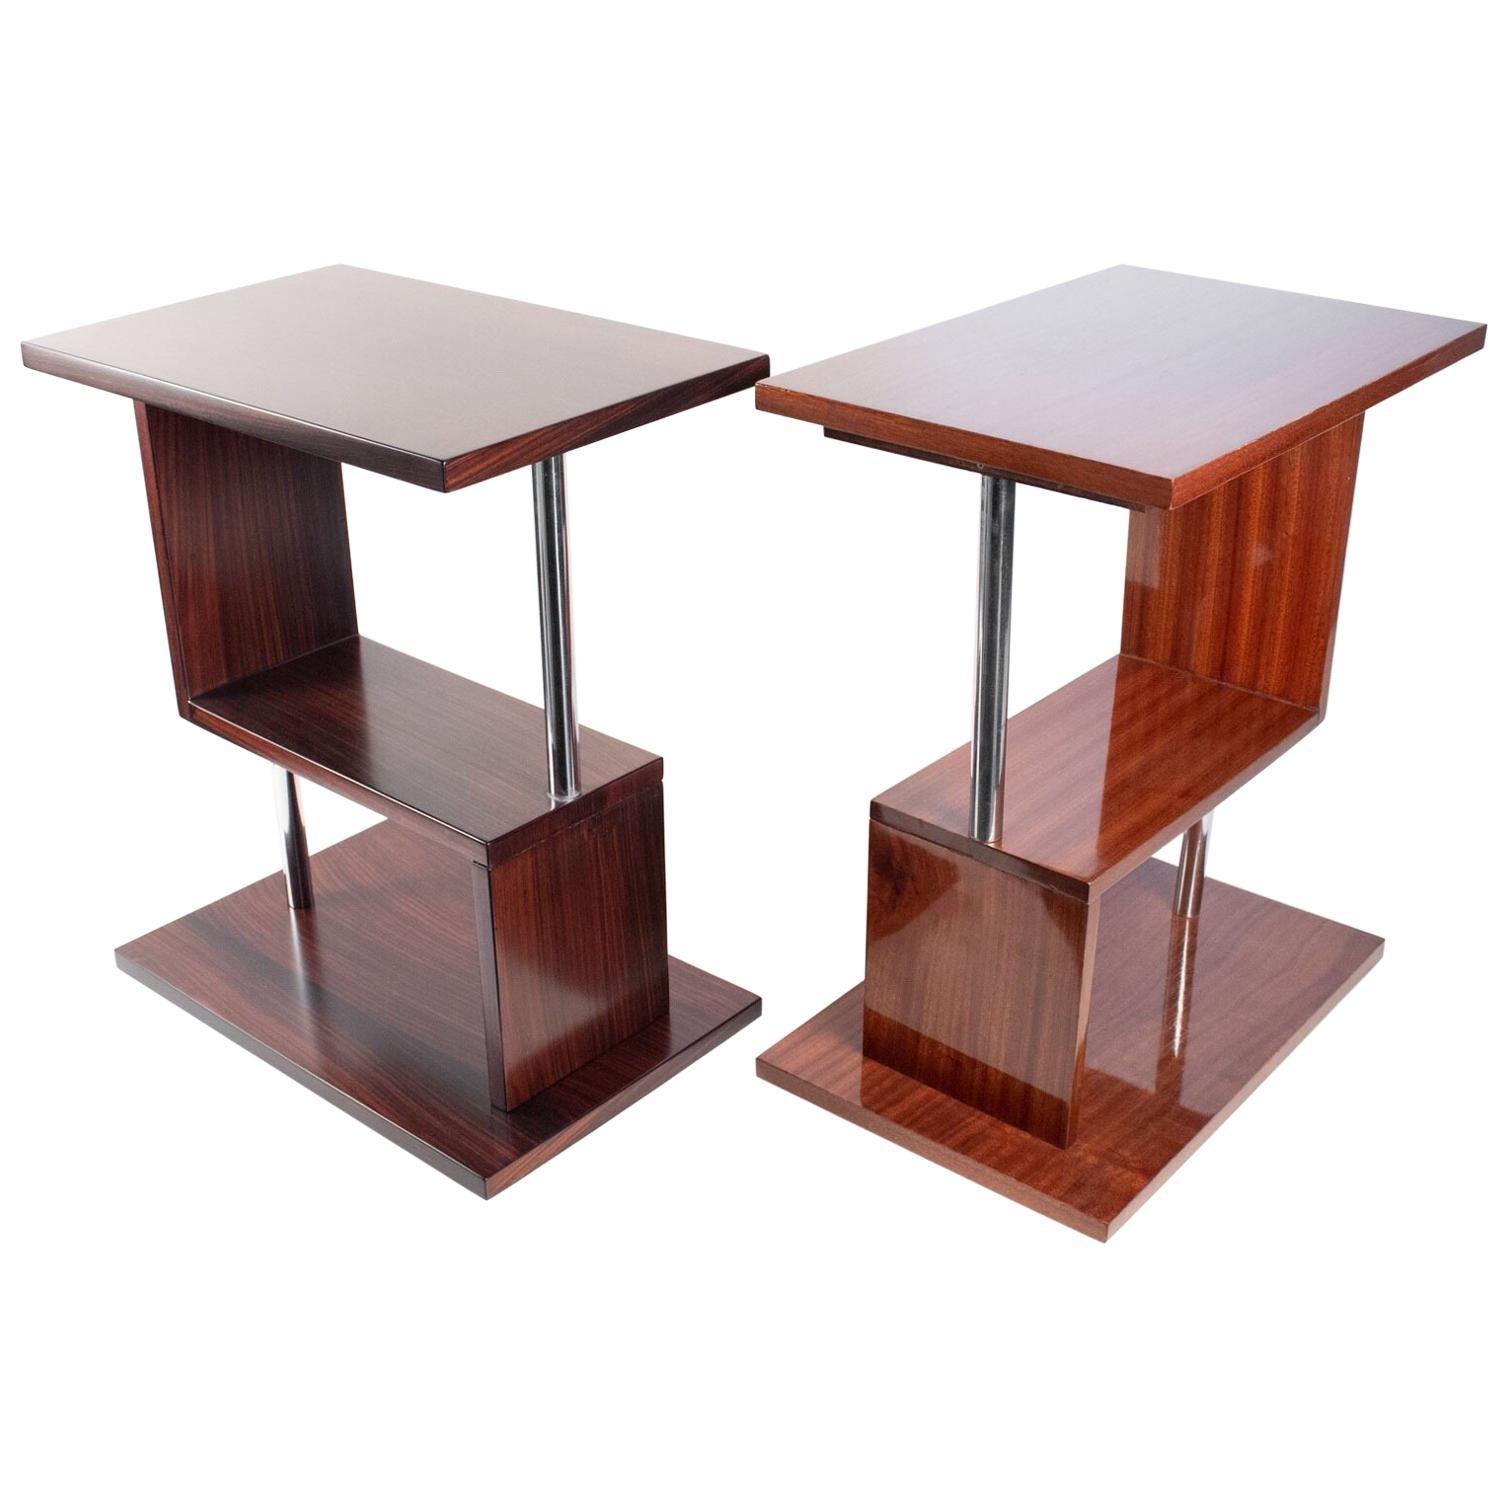 Fabulous Set of Two Fruitwood Side Tables, Art Deco Style, France, 20th Century